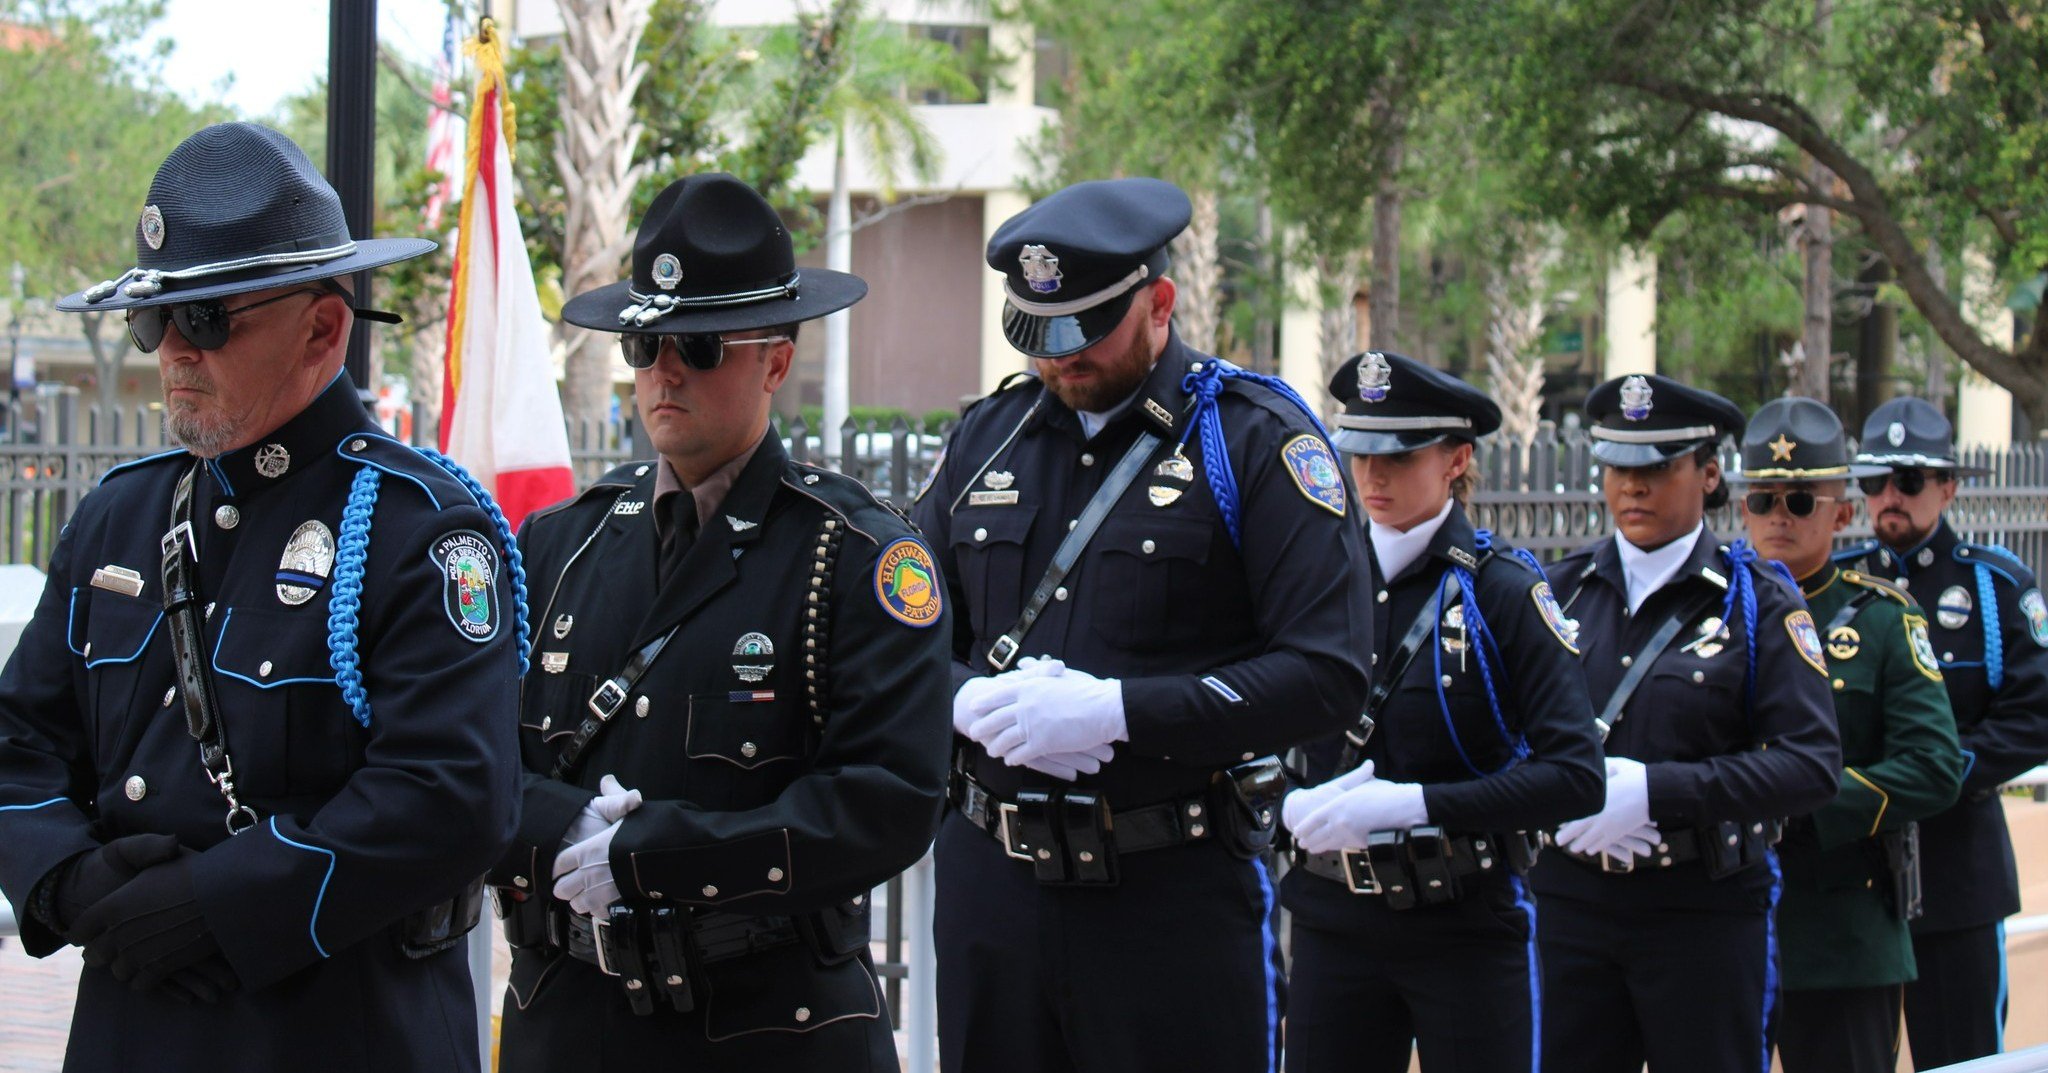 This morning we remembered those who have given the ultimate sacrifice in service of others. The Manatee County Law Enforcement Memorial service, presented by Manatee FOP Lodge 70, honored ten fallen law enforcement officers from Manatee County. 
Mar